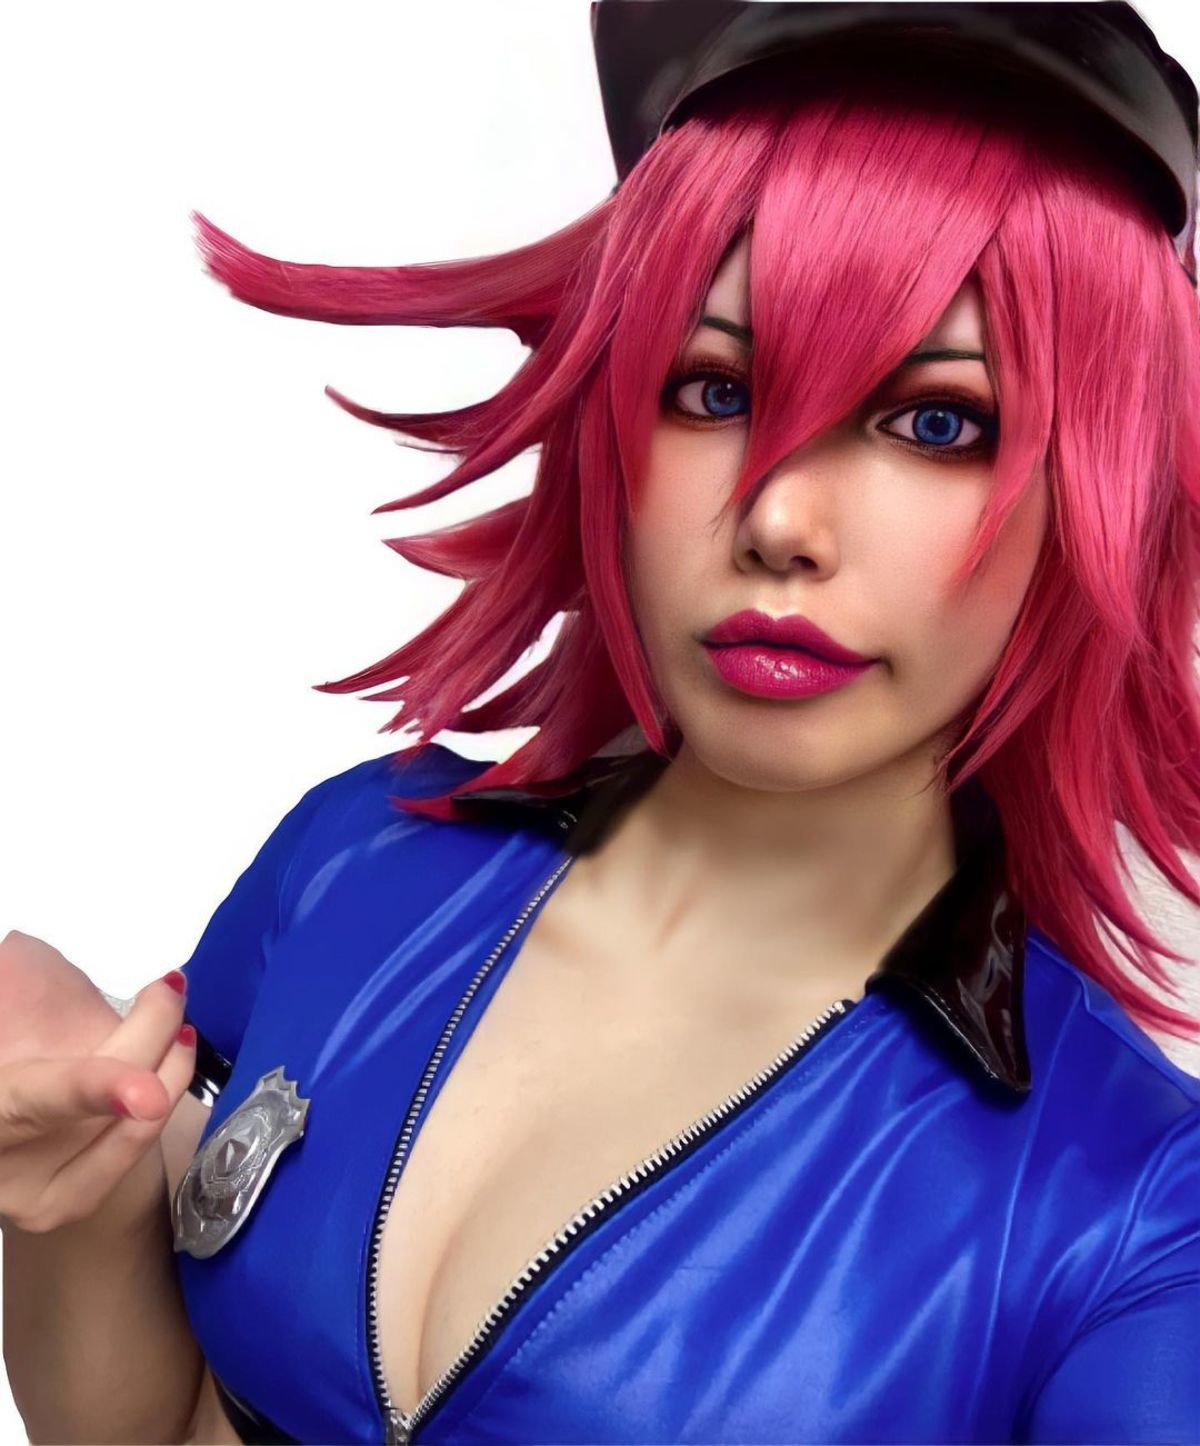 Poison cosplay by Rytaros. .. Should spend any simp money she gets on photoshop lessons 3/10